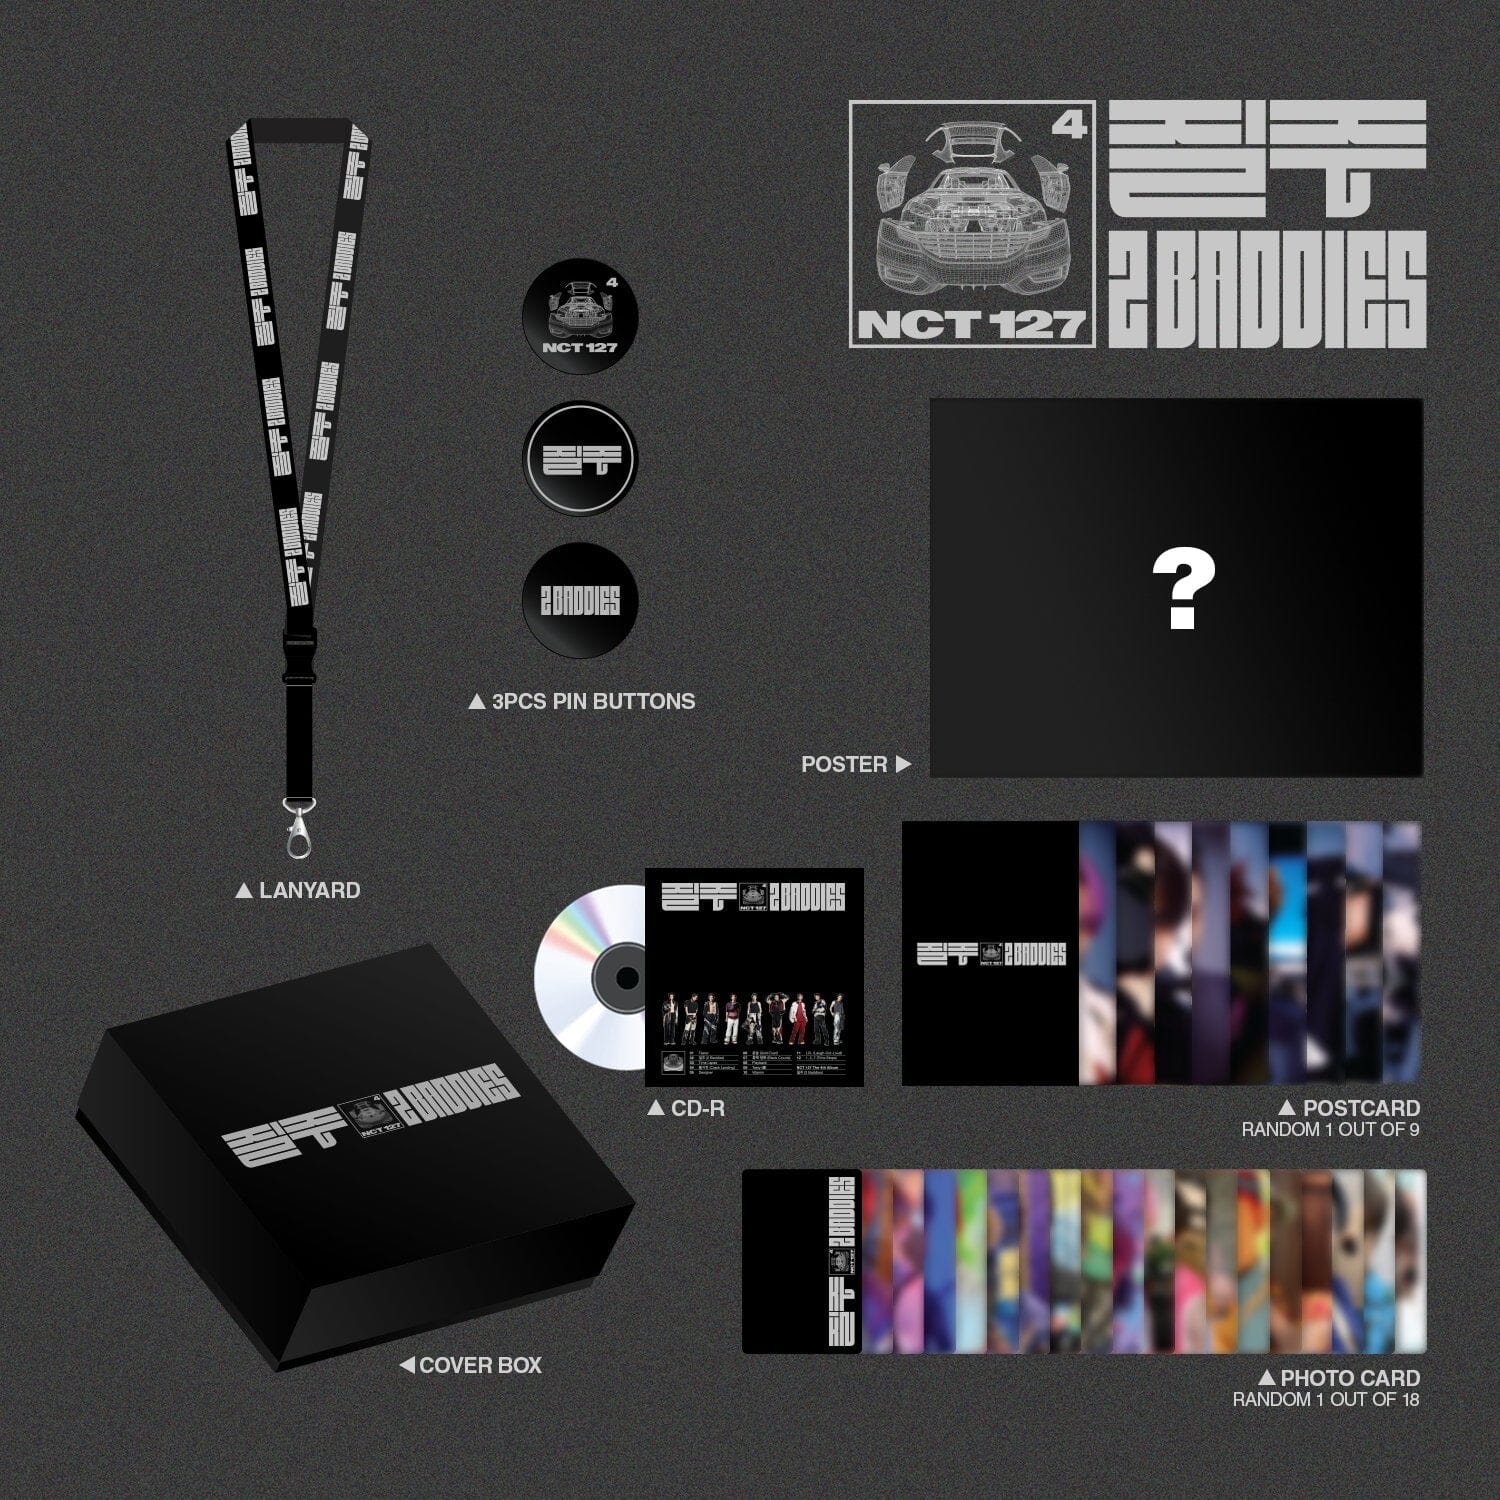 [SGS] NCT 127 The 4th Album ‘2 Baddies’ Lanyard+button Deluxe Box Set + Extra Photocard